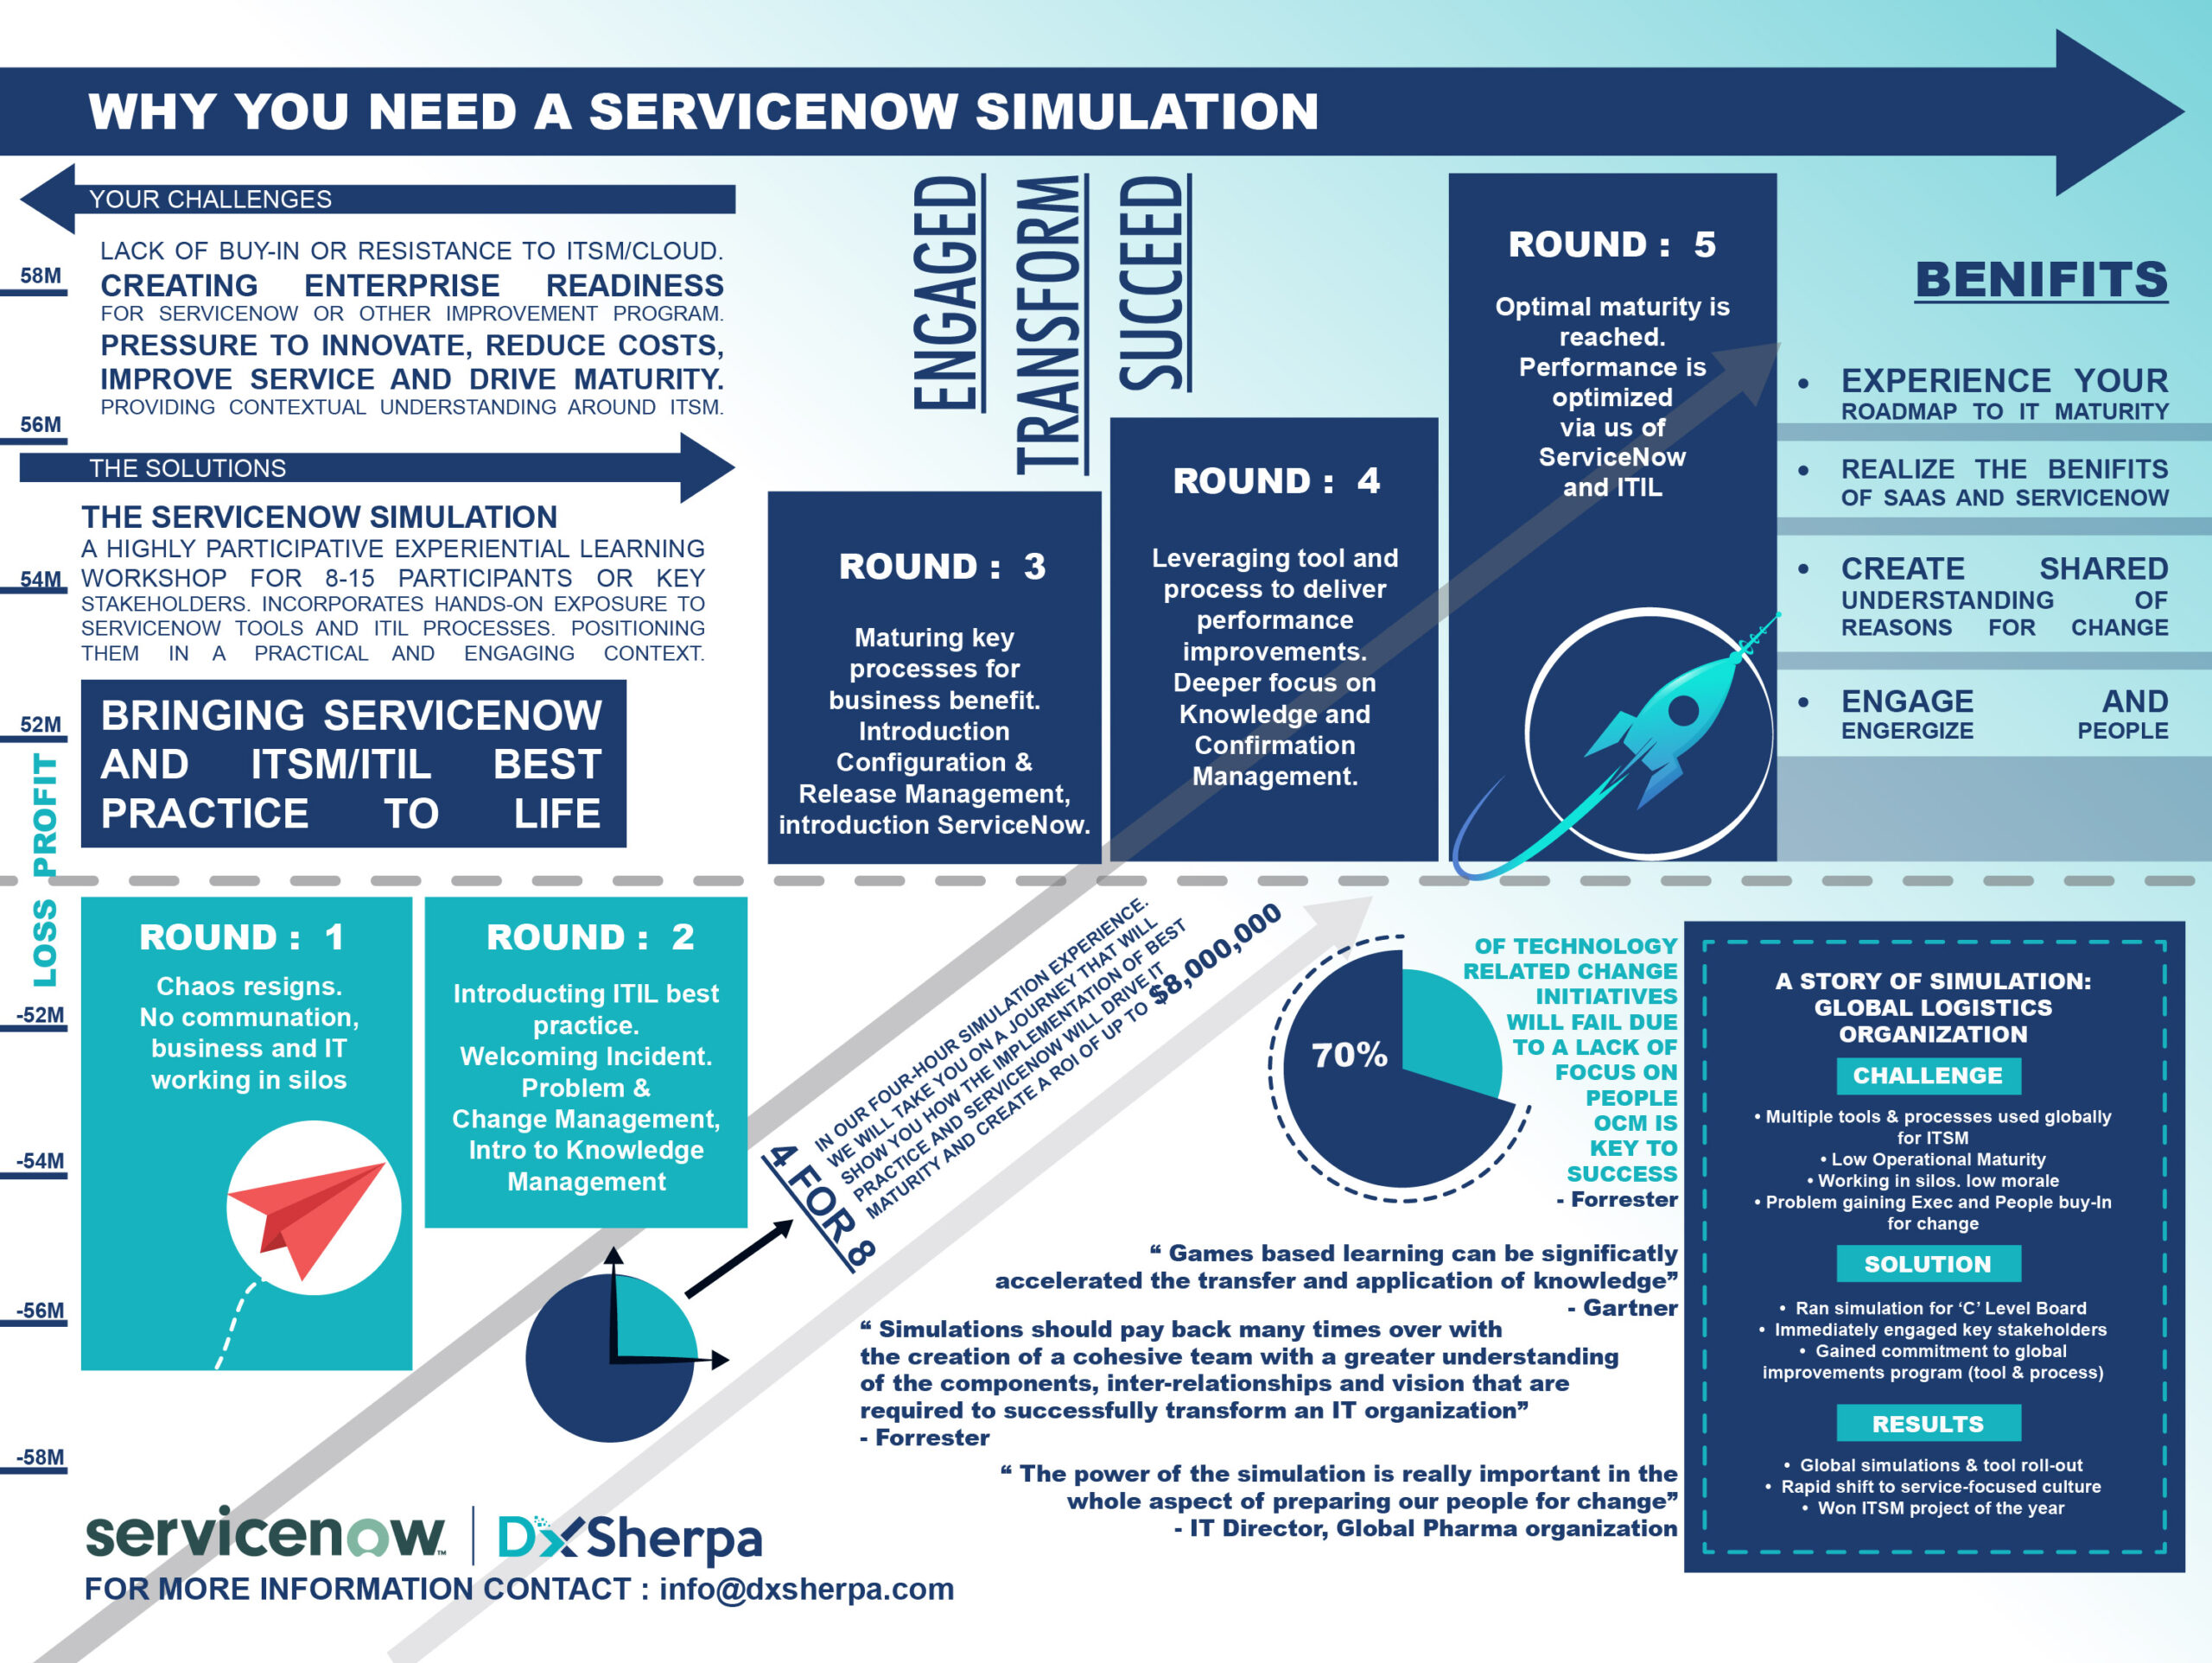 Why you Need a ServiceNow Simulation